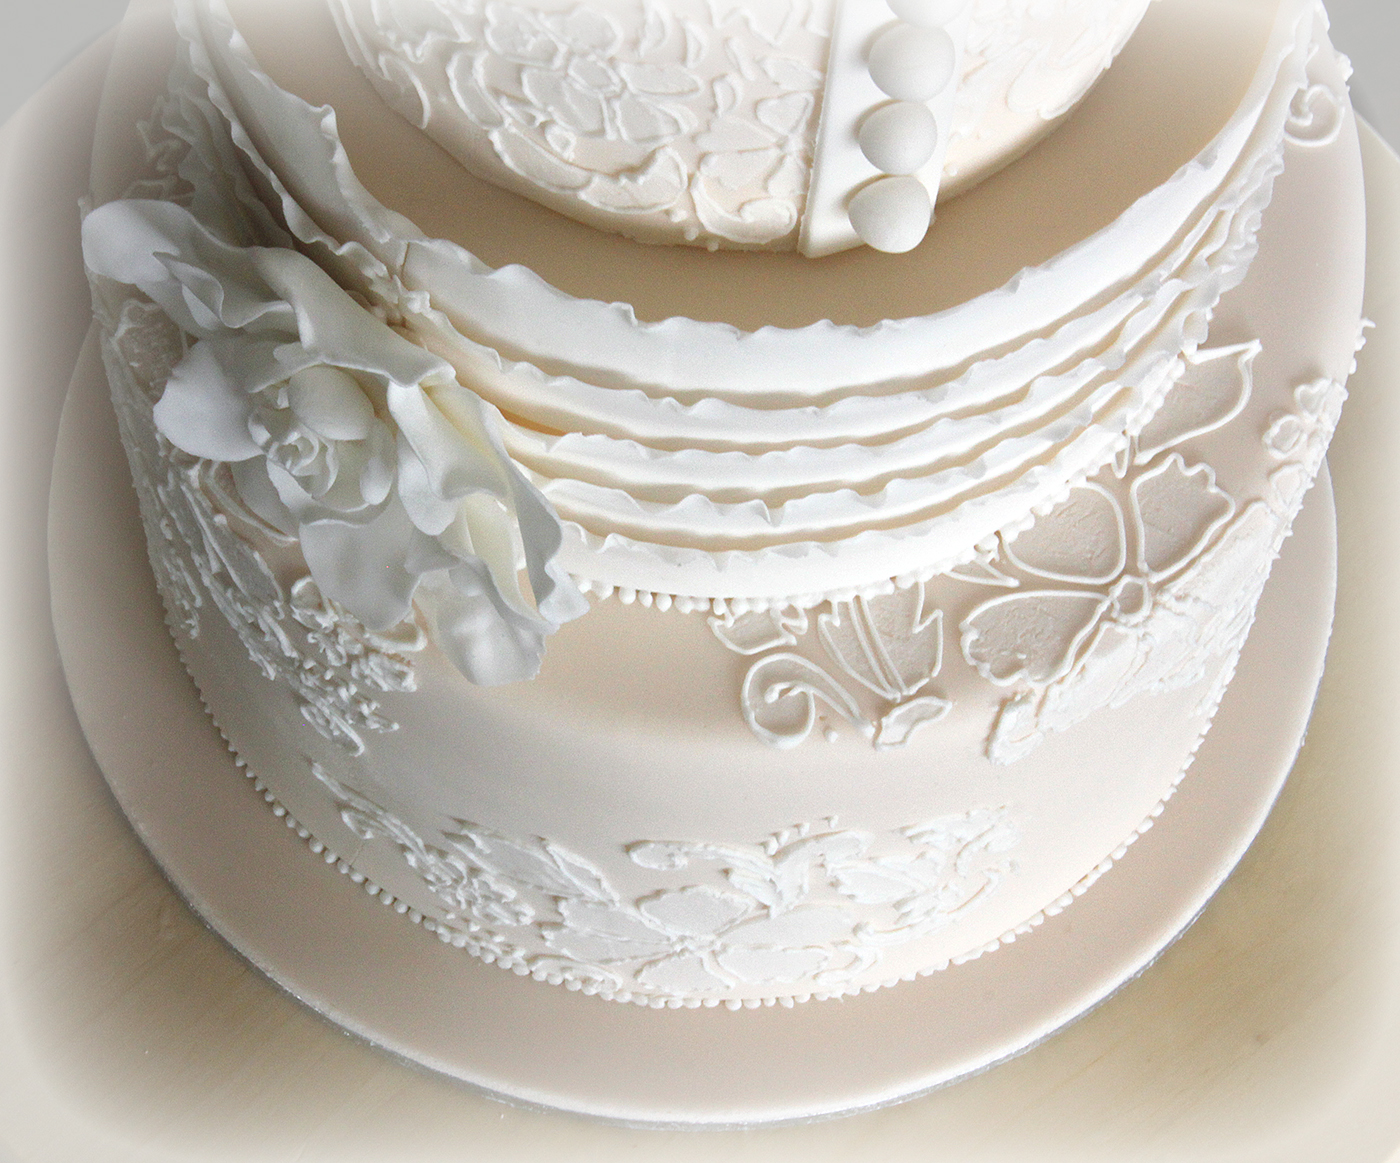 Lace Stencil for Wedding Cakes